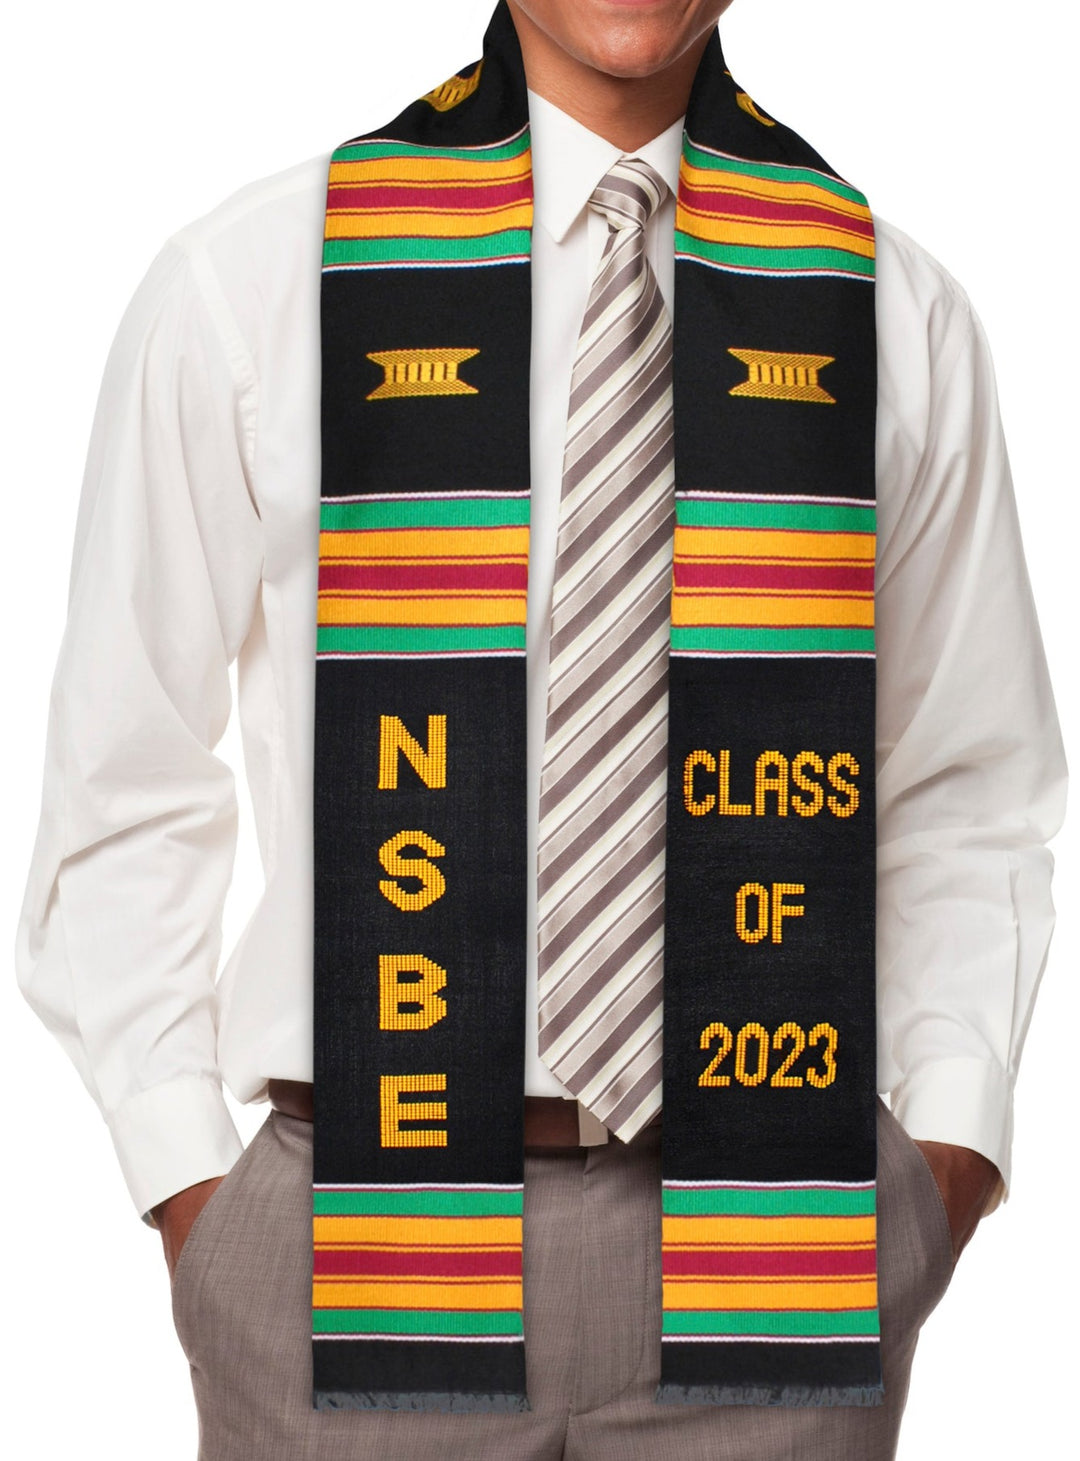 NSBE kente stole nation society of black engineers